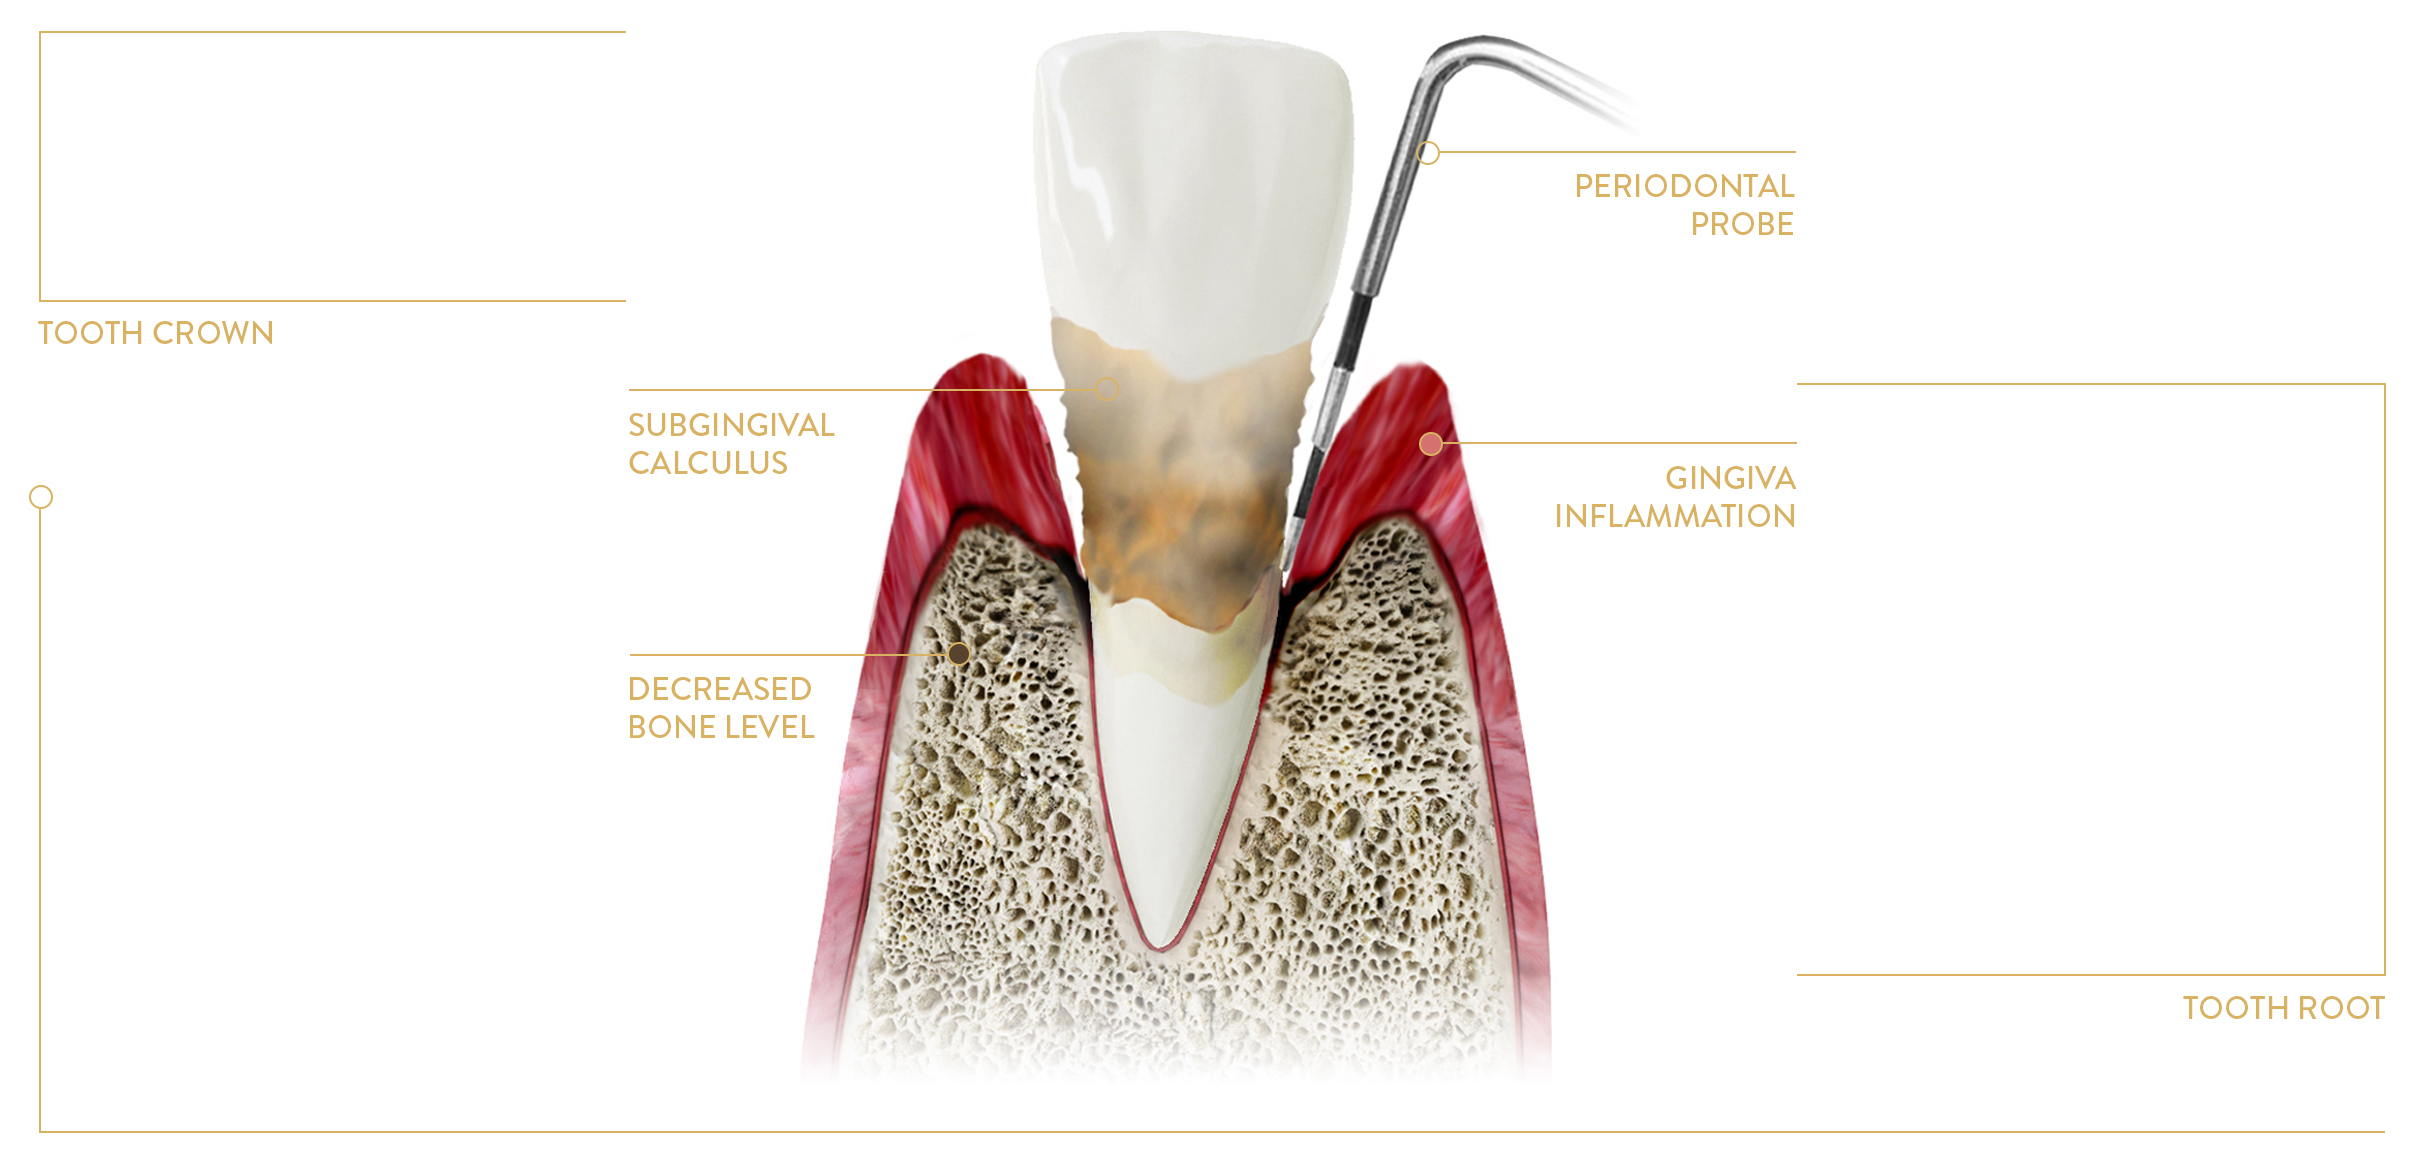 ADVANCED INFLAMMATION OF the PARODONTIUM (FORmerly known as “PERIODONTOSIS”)